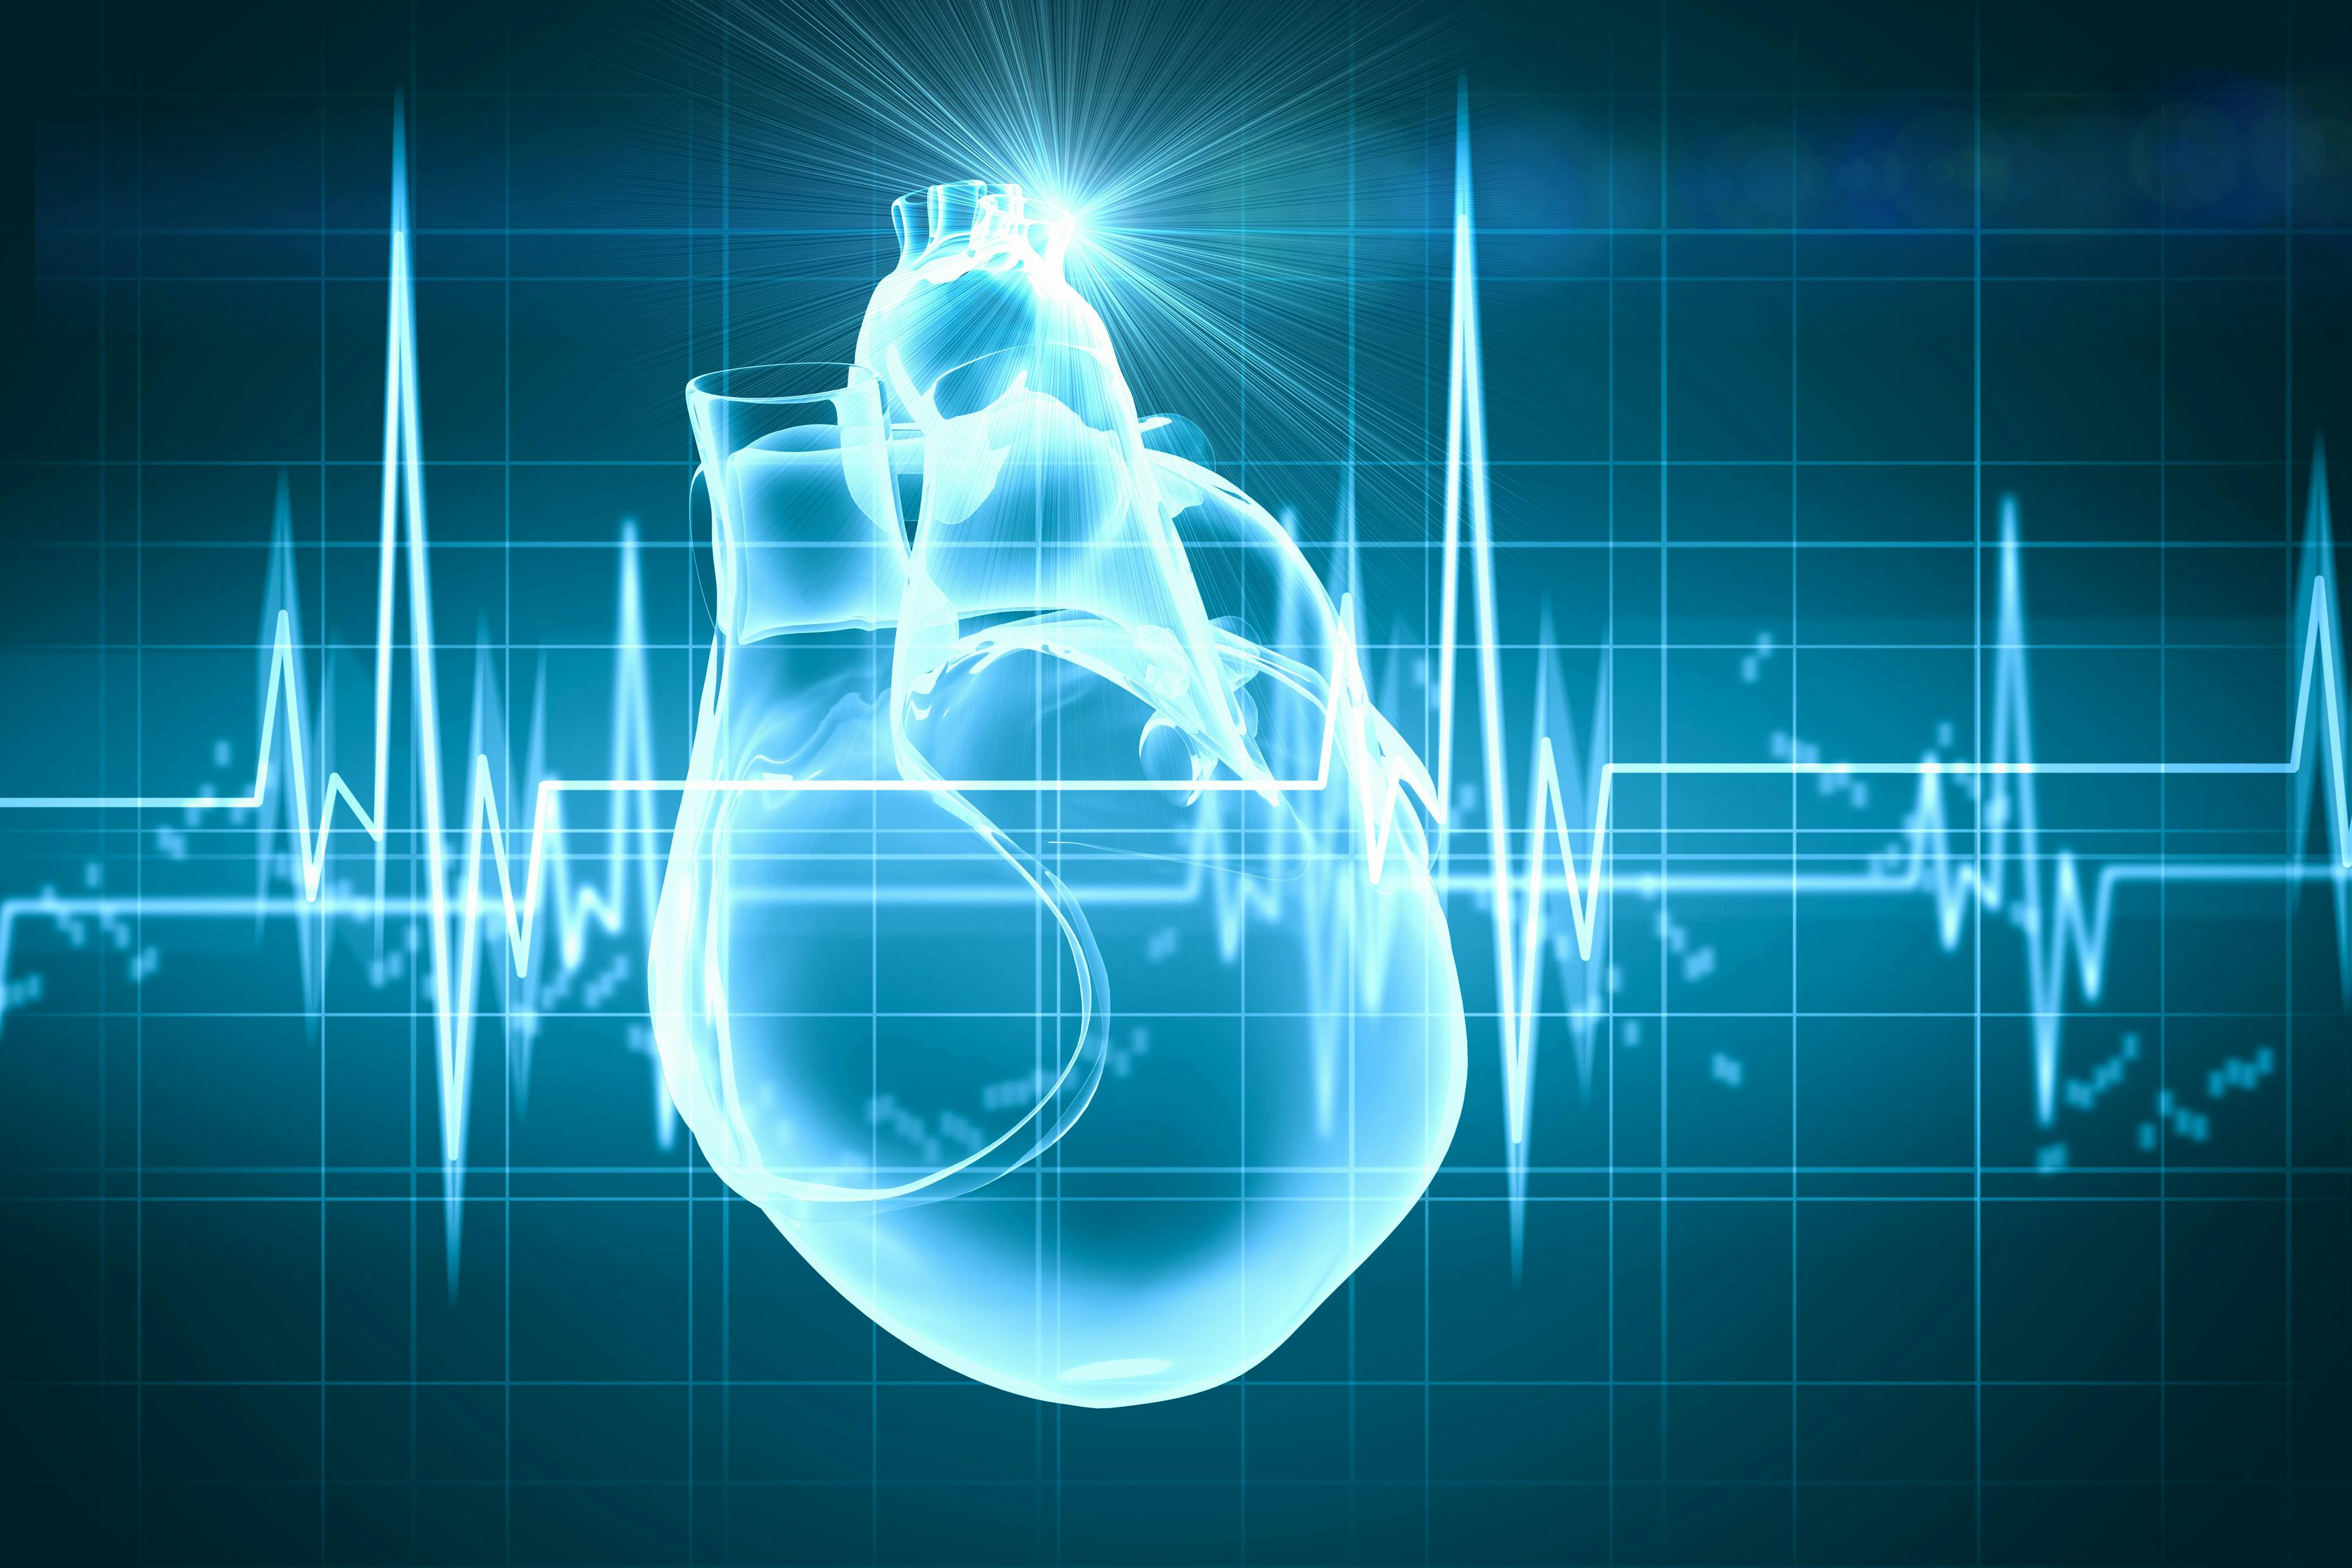 Certain Patients With Heart Failure May Benefit From Stem Cell Therapy